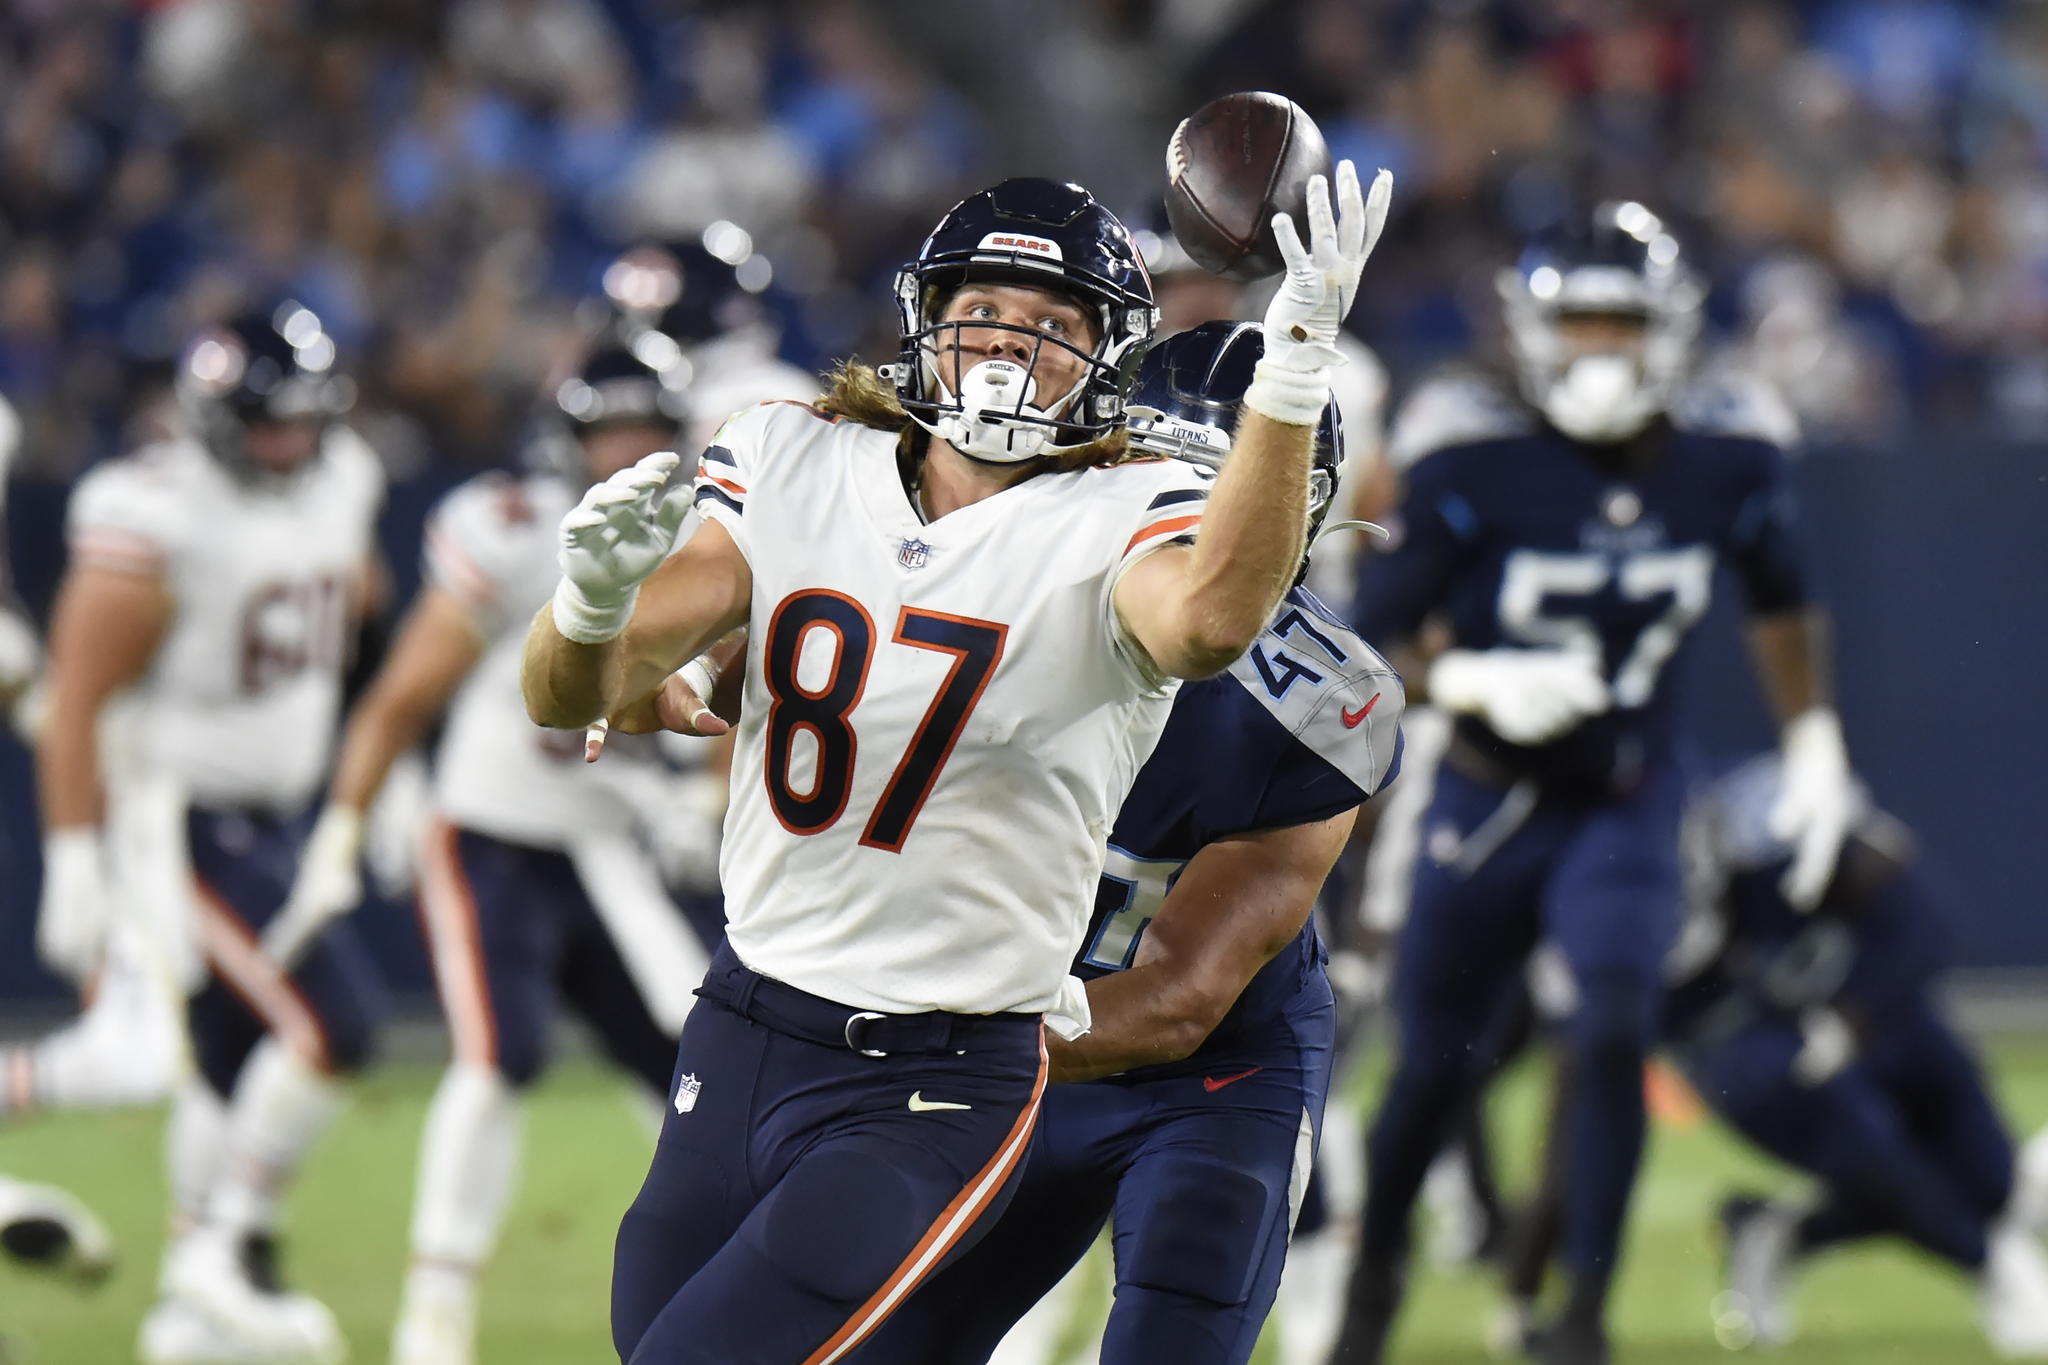 Chicago Bears tight end makes a one-handed catch during their last game against Tennessee Titans before scoring.